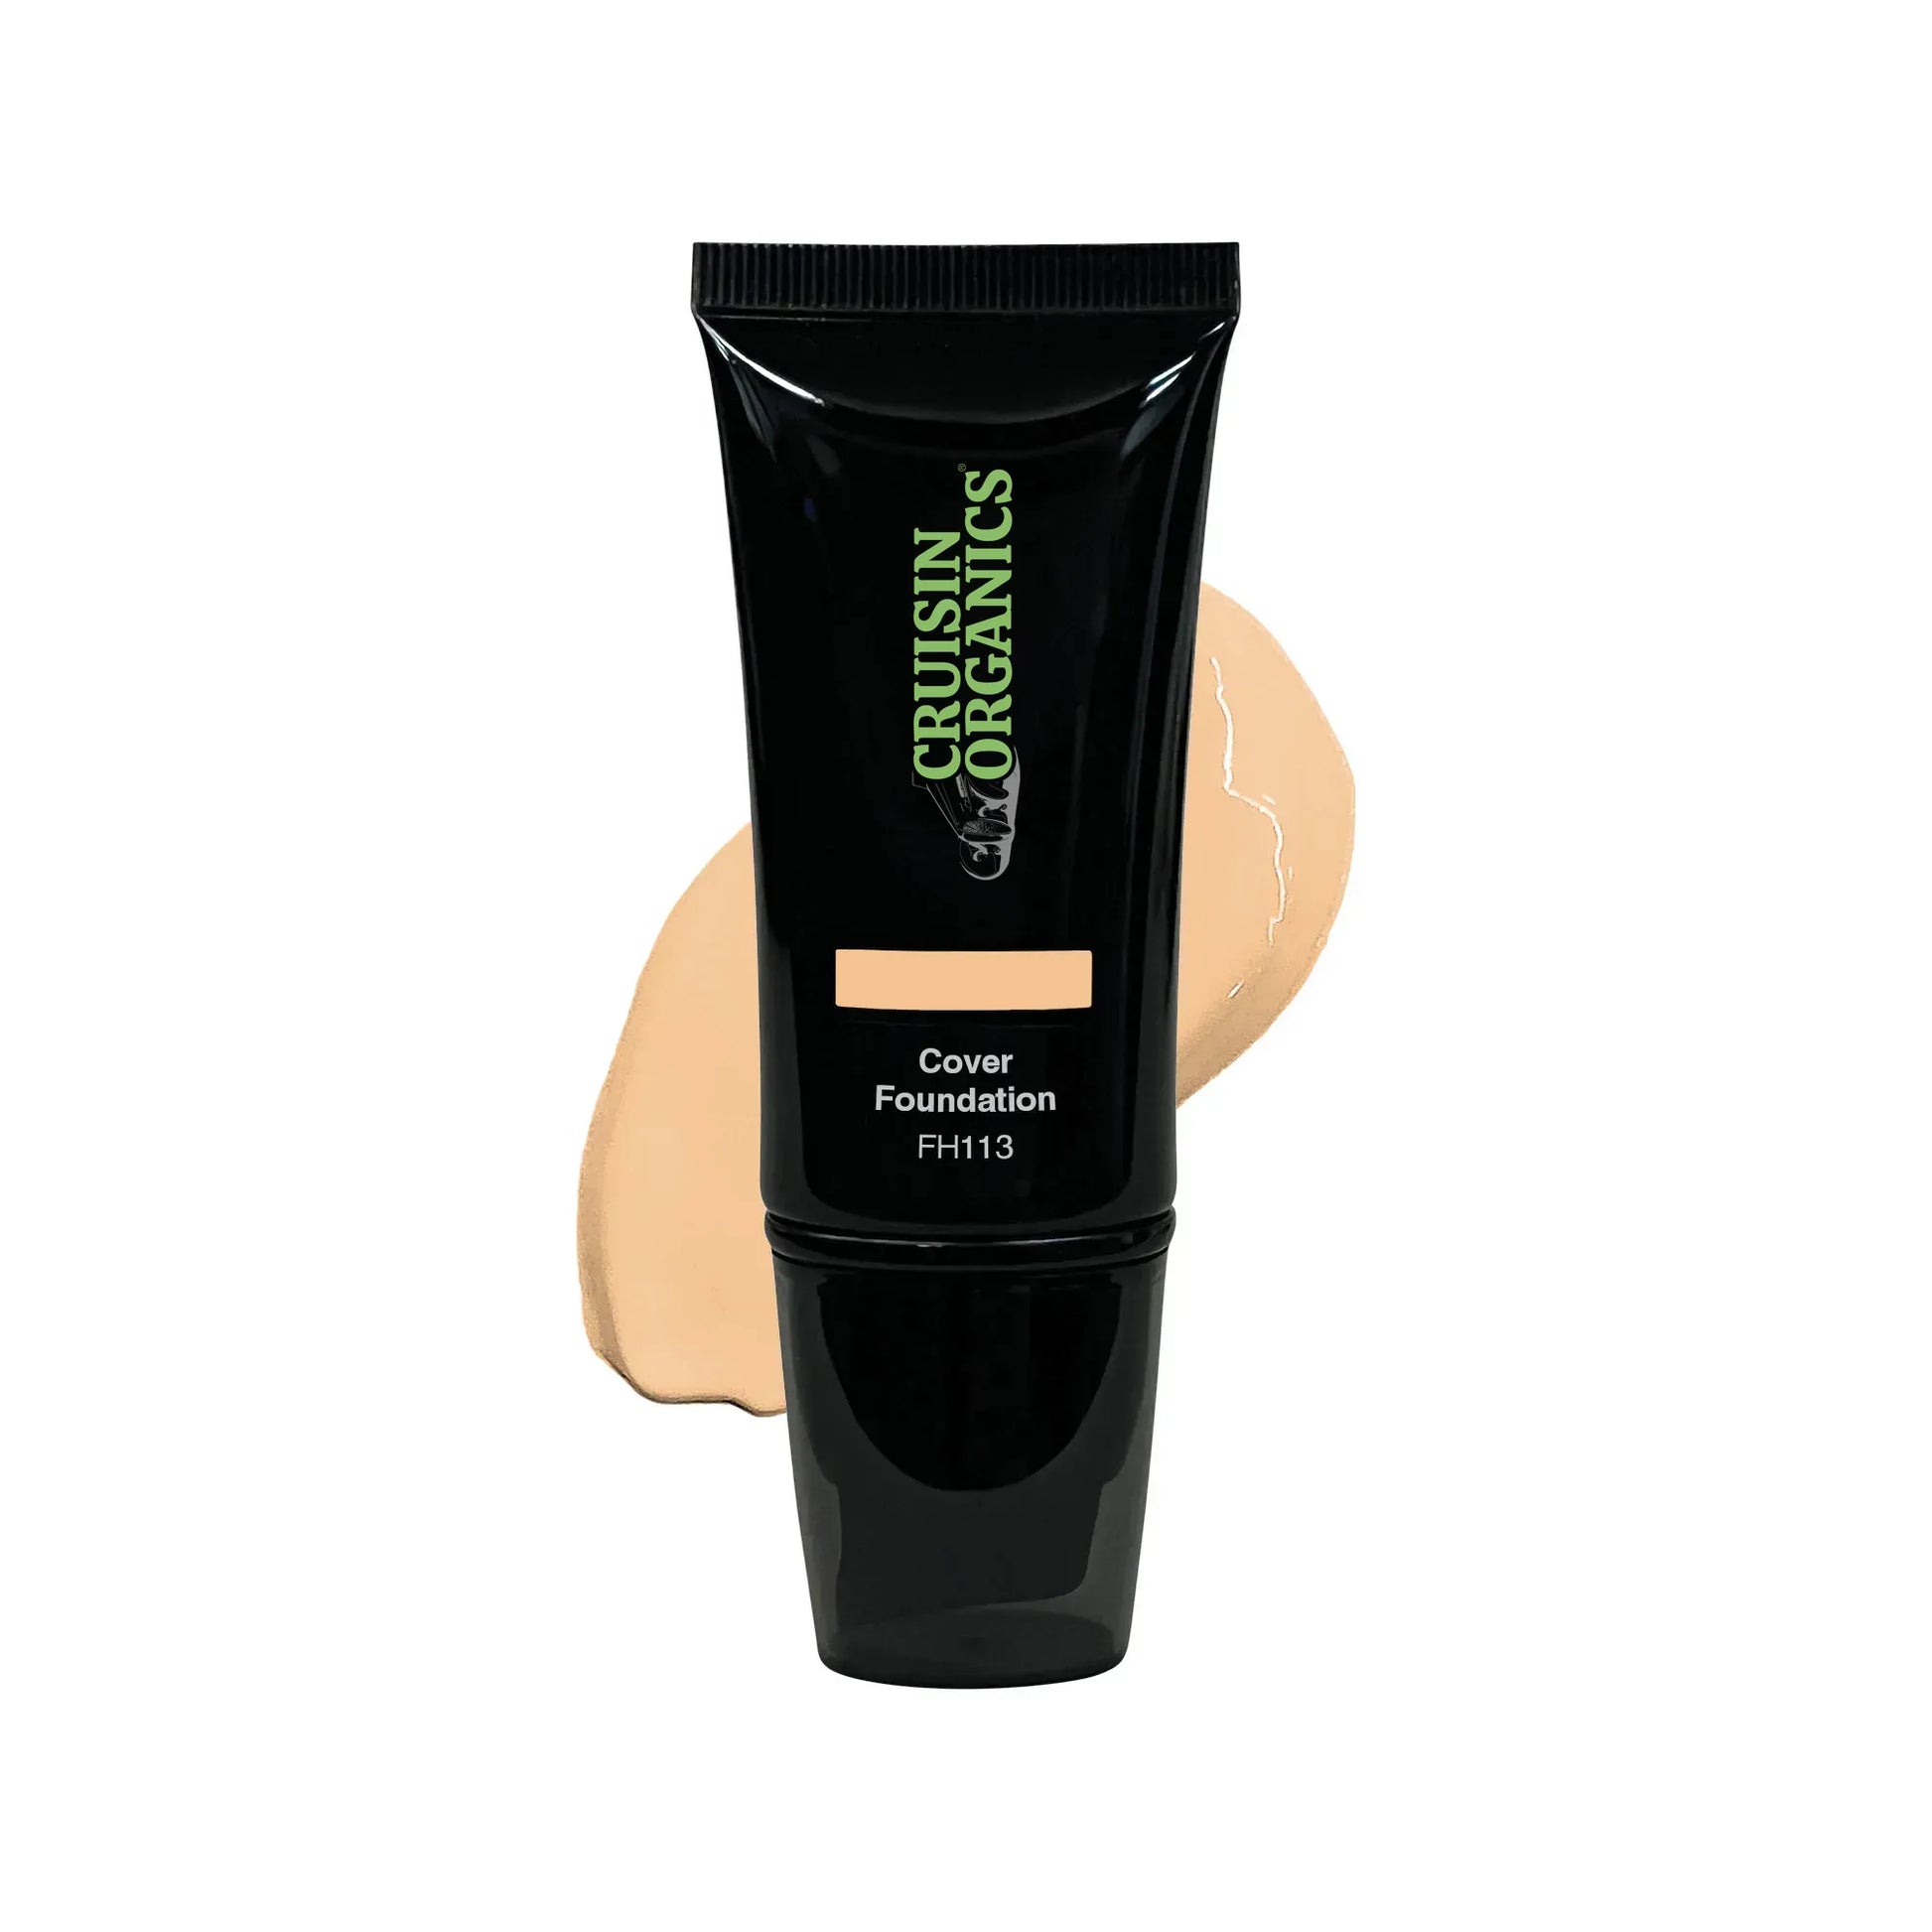 Your complexion will be flawless with only one swipe of Cruisin Organics full-coverage foundation! Your skin tone and dark spots will be evened out with this long-wearing, full-coverage foundation. Your skin feels utterly weightless and silky after applying the blendable product. Use a matte finish to finish off your makeup appearance and diffuse your pores.